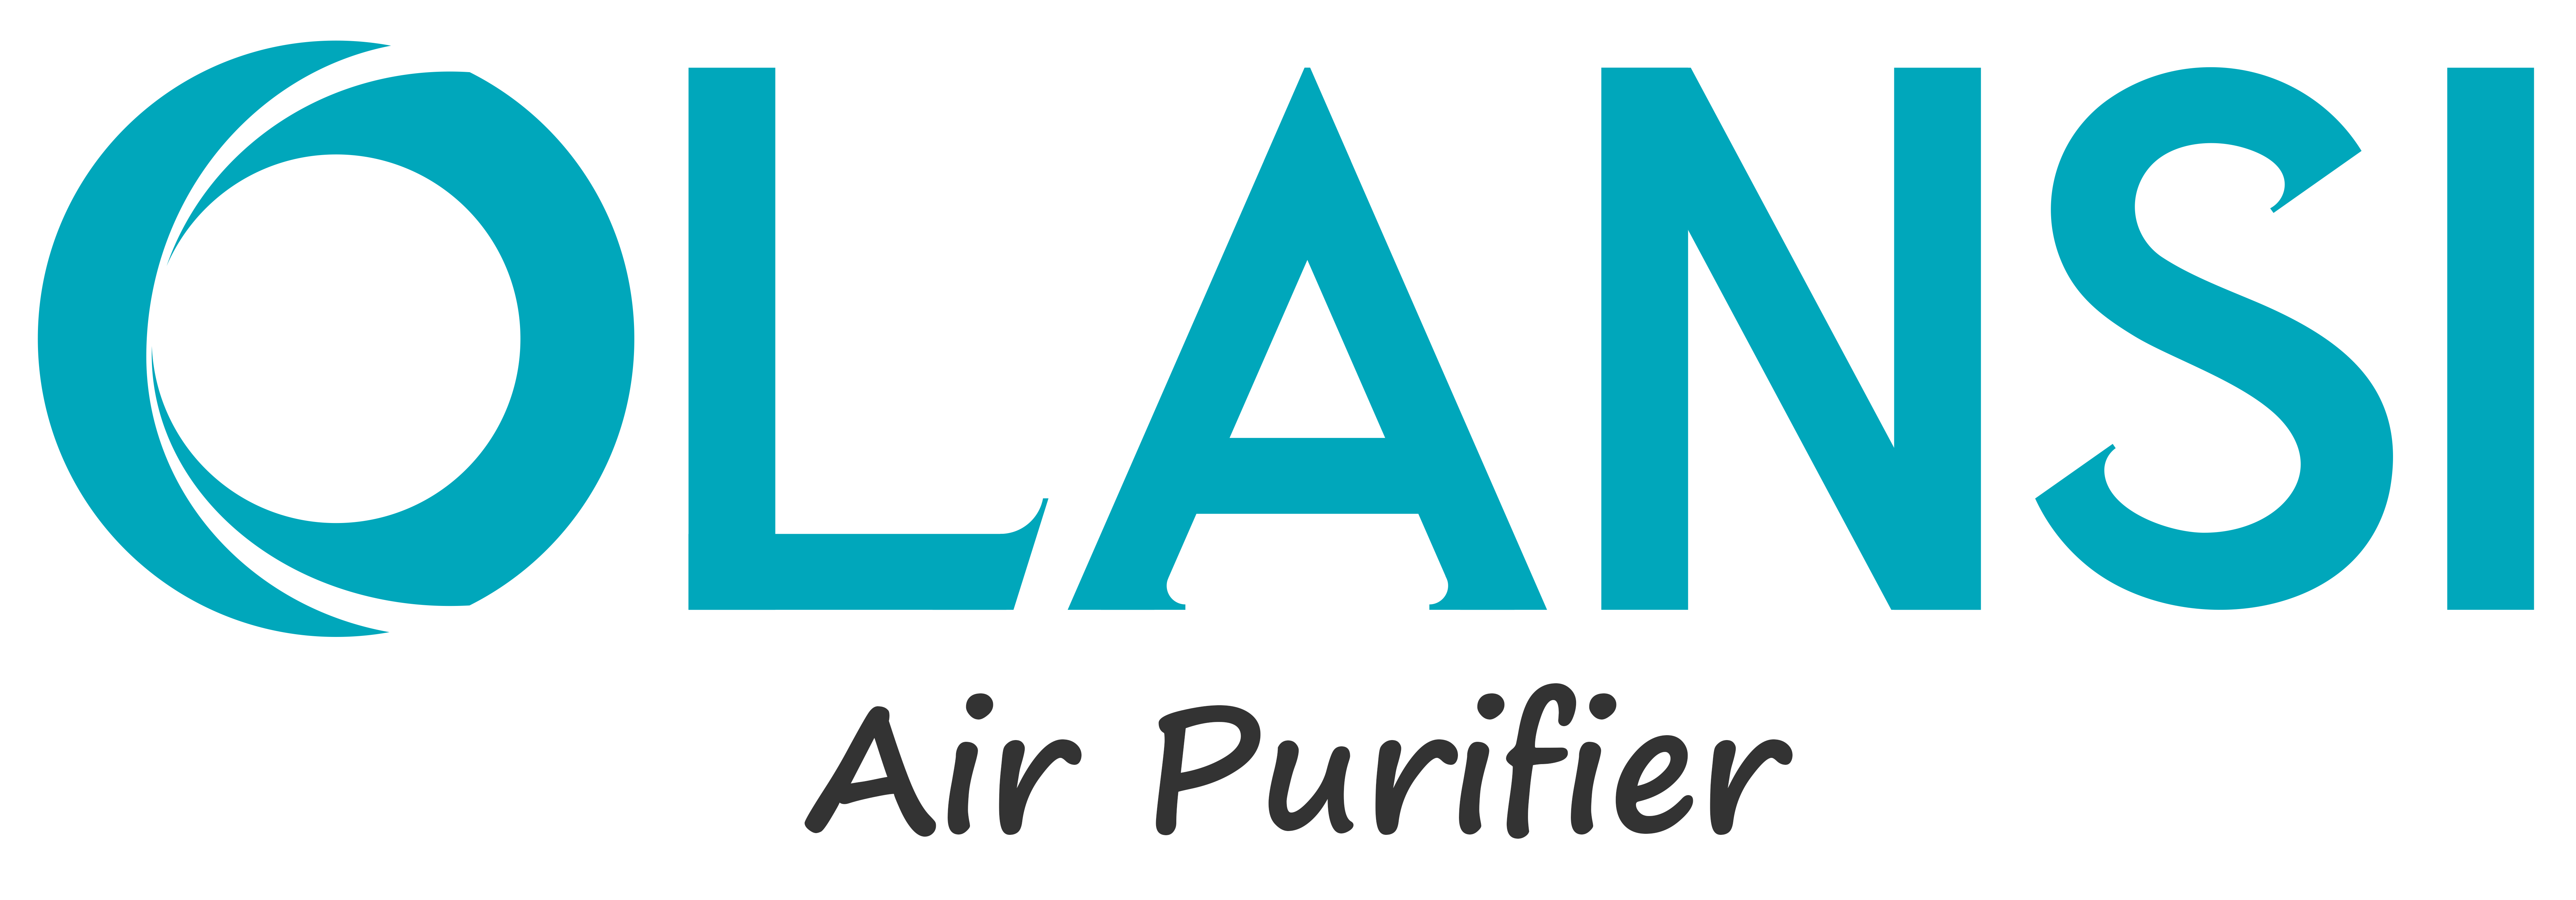 The Top 1 OEM/ODM Air purifier manufacturer in China logo